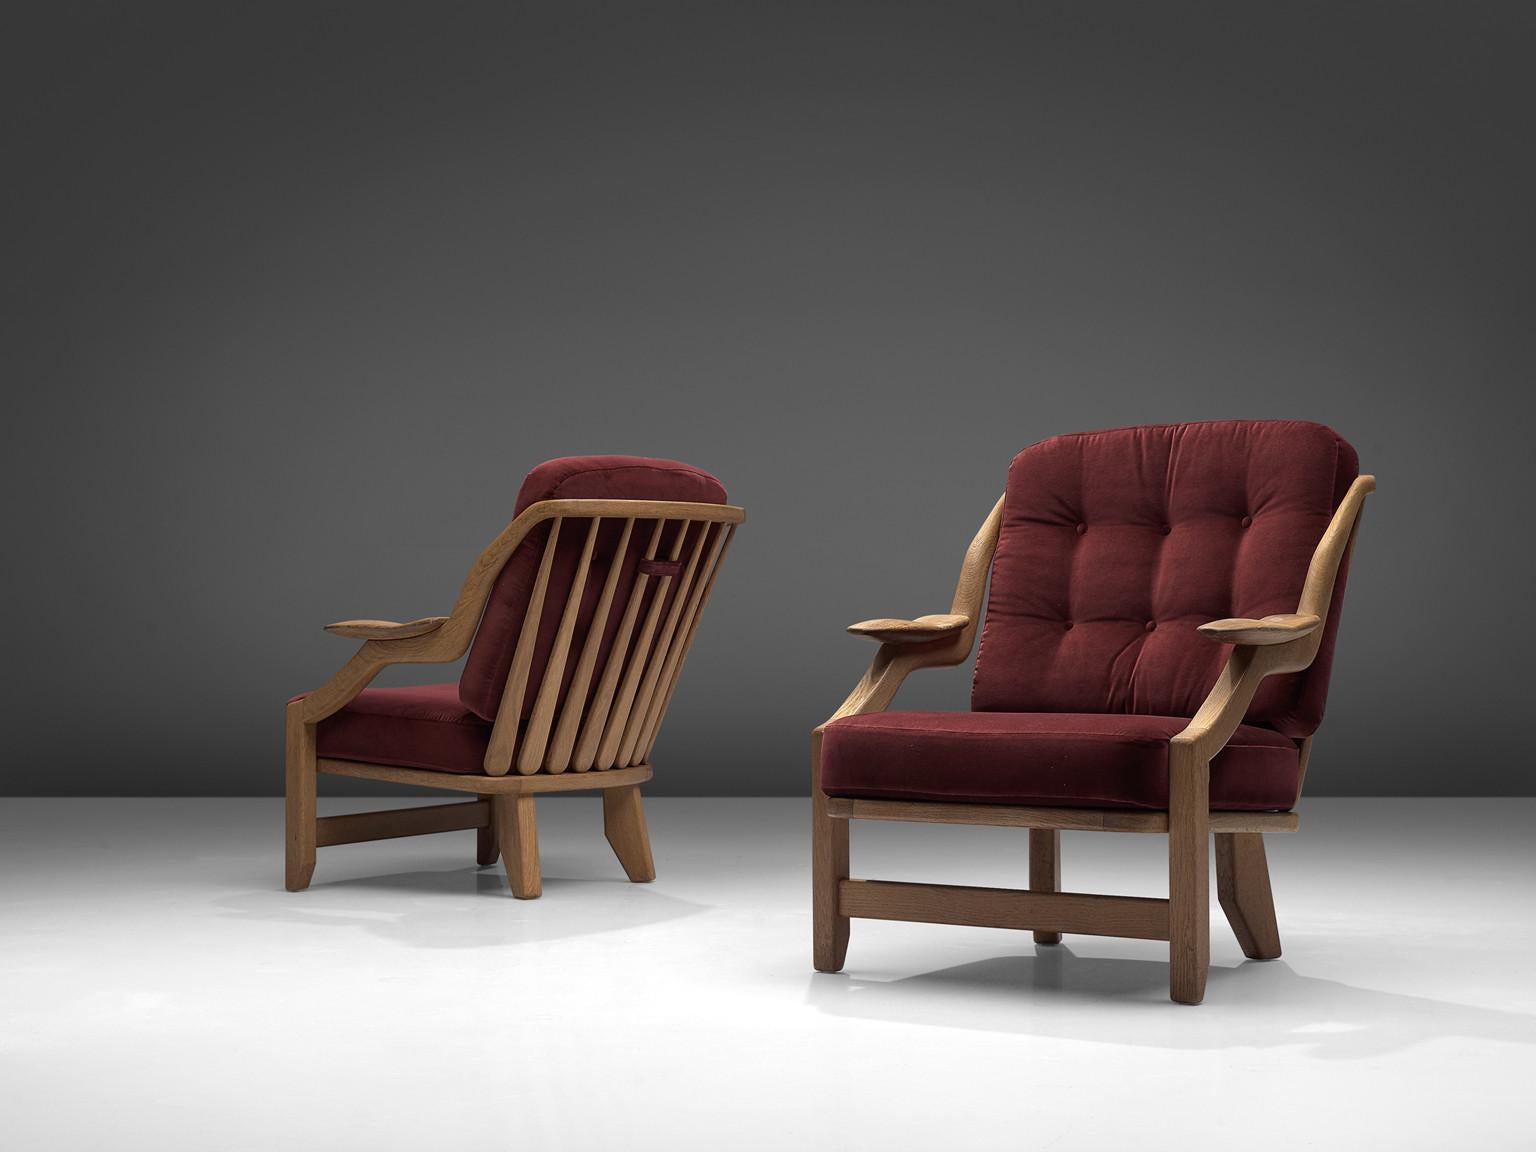 Guillerme et Chambron, pair of lounge chairs burgundy fabric and oak, France, 1950s.

This French designer duo is known for their extreme high quality solid oak furniture, from which this orange set is another great example. These chairs have a very